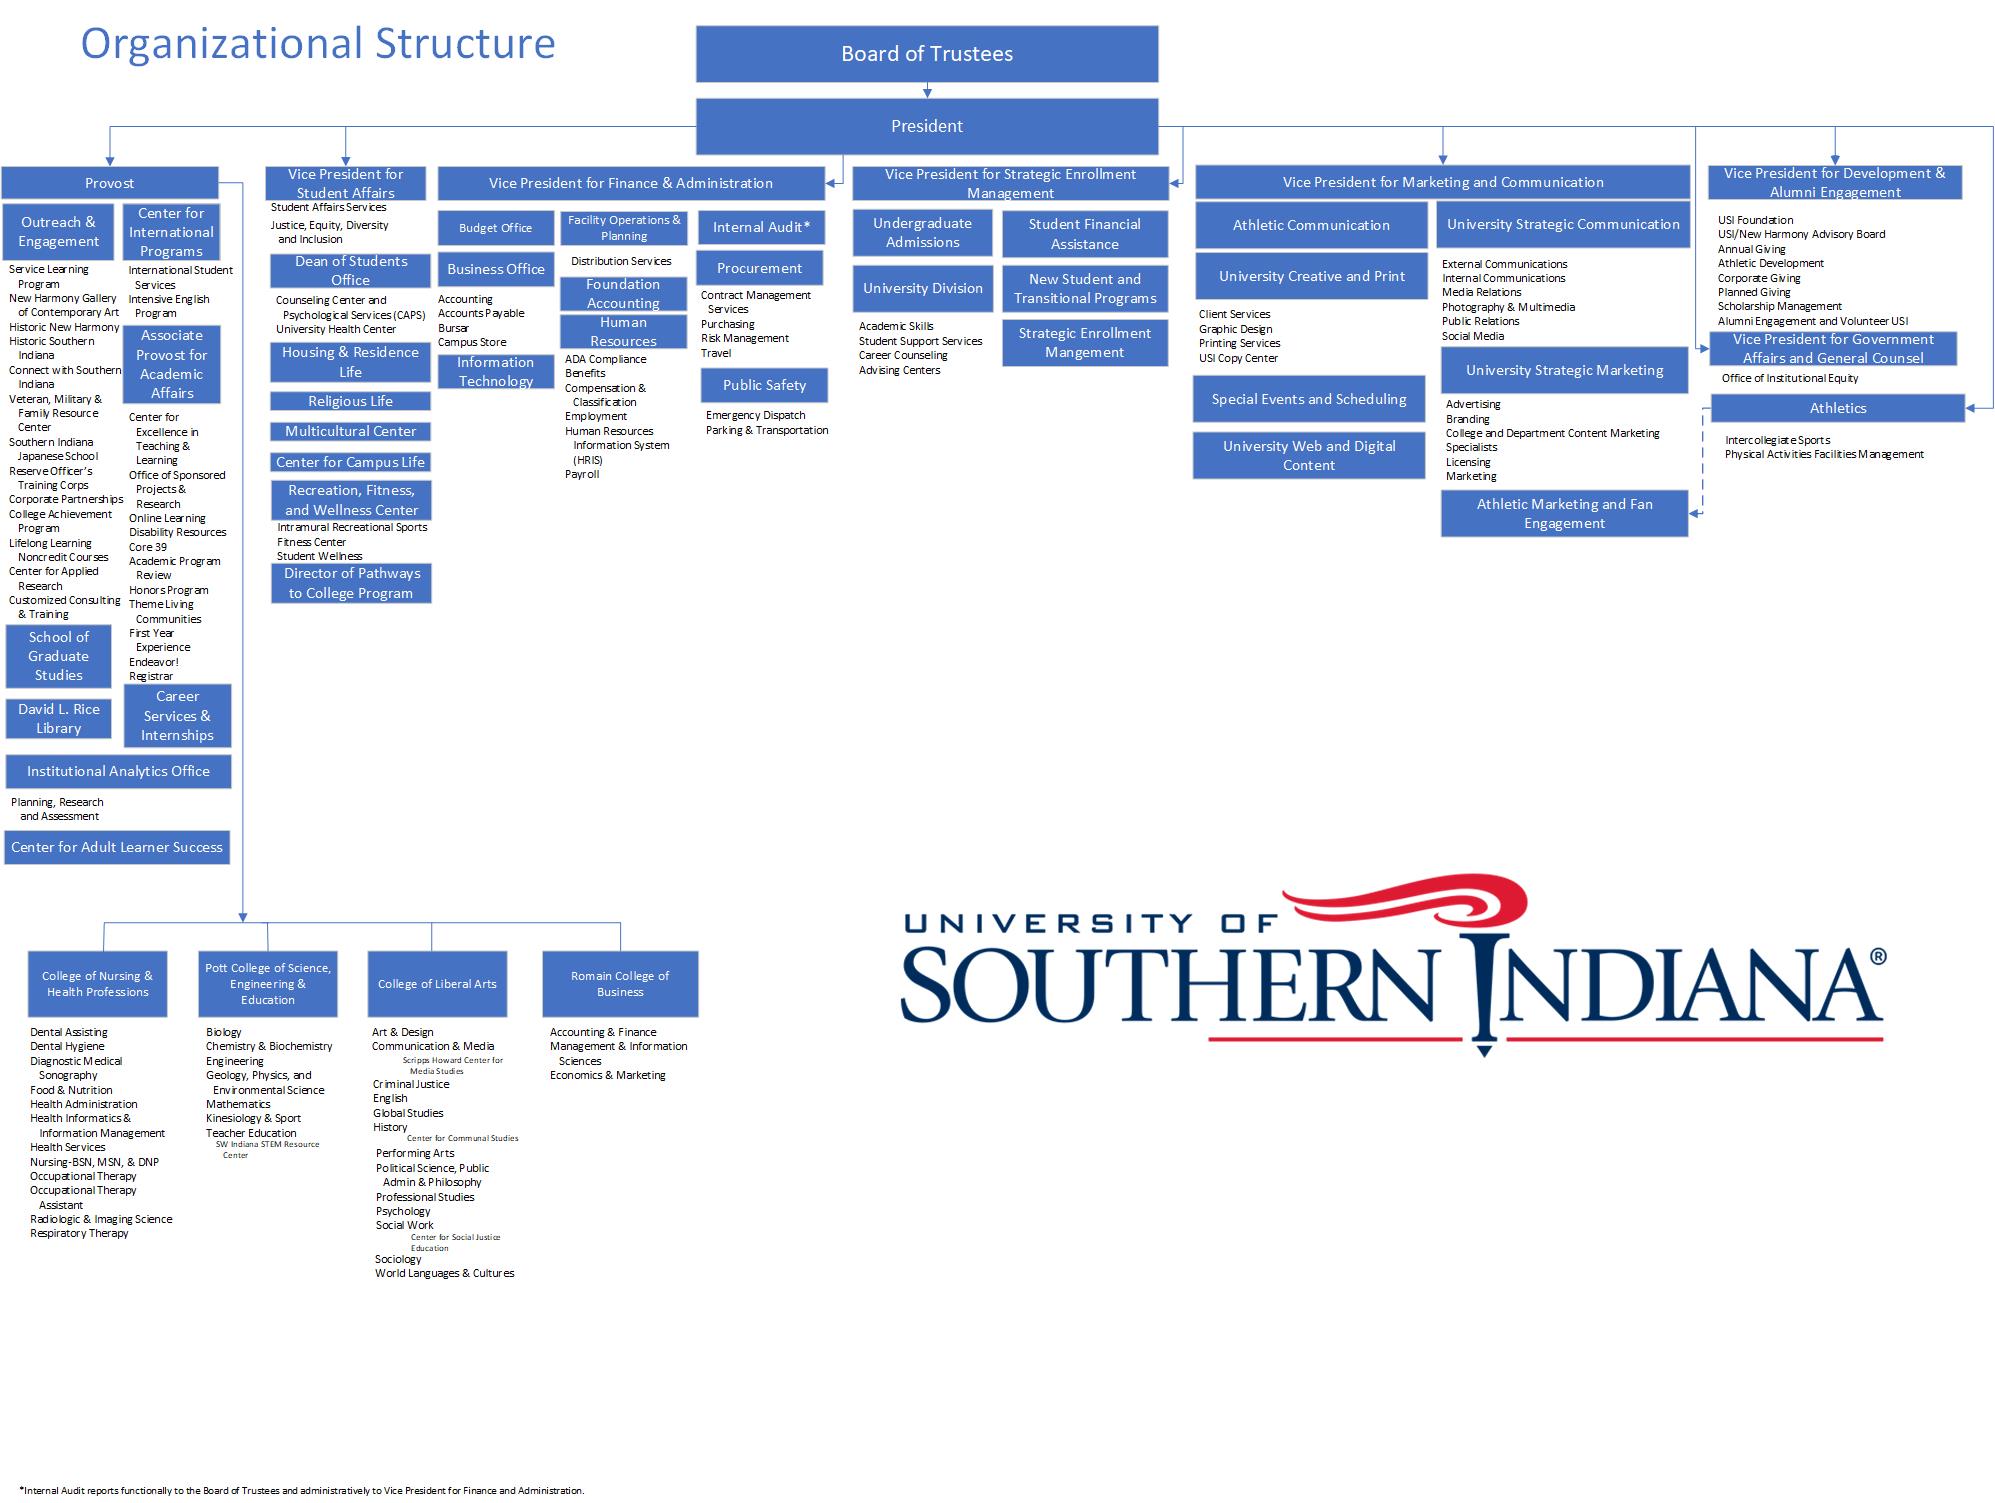 Organizational Structure for USI